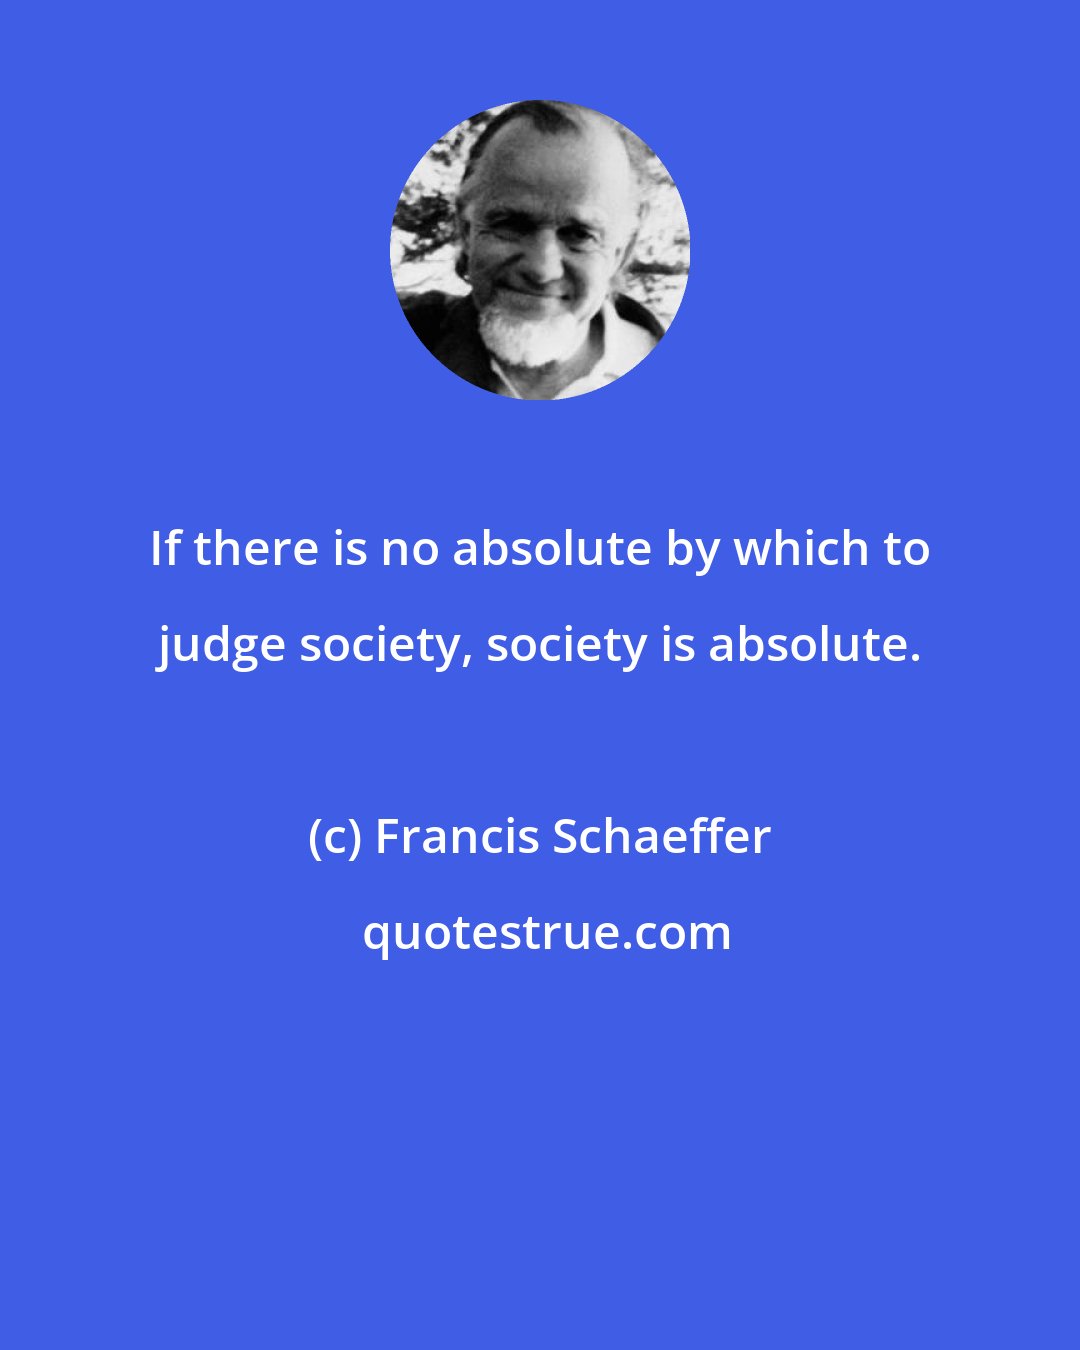 Francis Schaeffer: If there is no absolute by which to judge society, society is absolute.